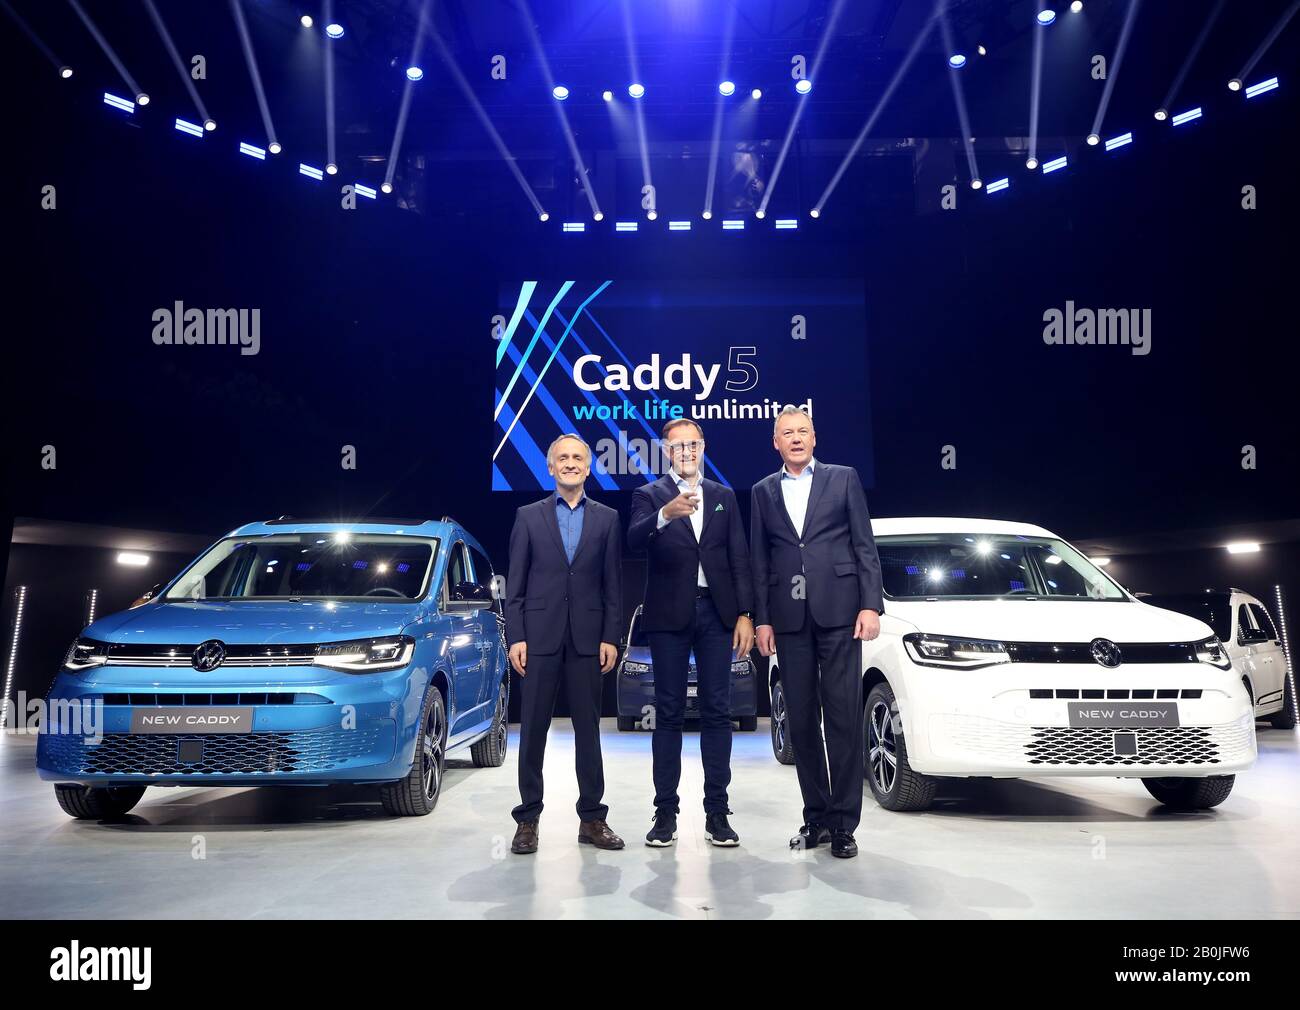 Duesseldorf, Germany. 20th Feb, 2020. Albert Kirzinger (l-r), Head of Volkswagen Commercial Vehicle Design, Thomas Sedran, Chairman of the Board of Management of Volkswagen Commercial Vehicles, and Heinz Löw, Member of the Board of Management of Volkswagen Commercial Vehicles for Sales and Marketing, present the new VW Caddy 5, with Caddy Life on the left and Caddy Cargo on the right. Credit: Roland Weihrauch/dpa/Alamy Live News Stock Photo